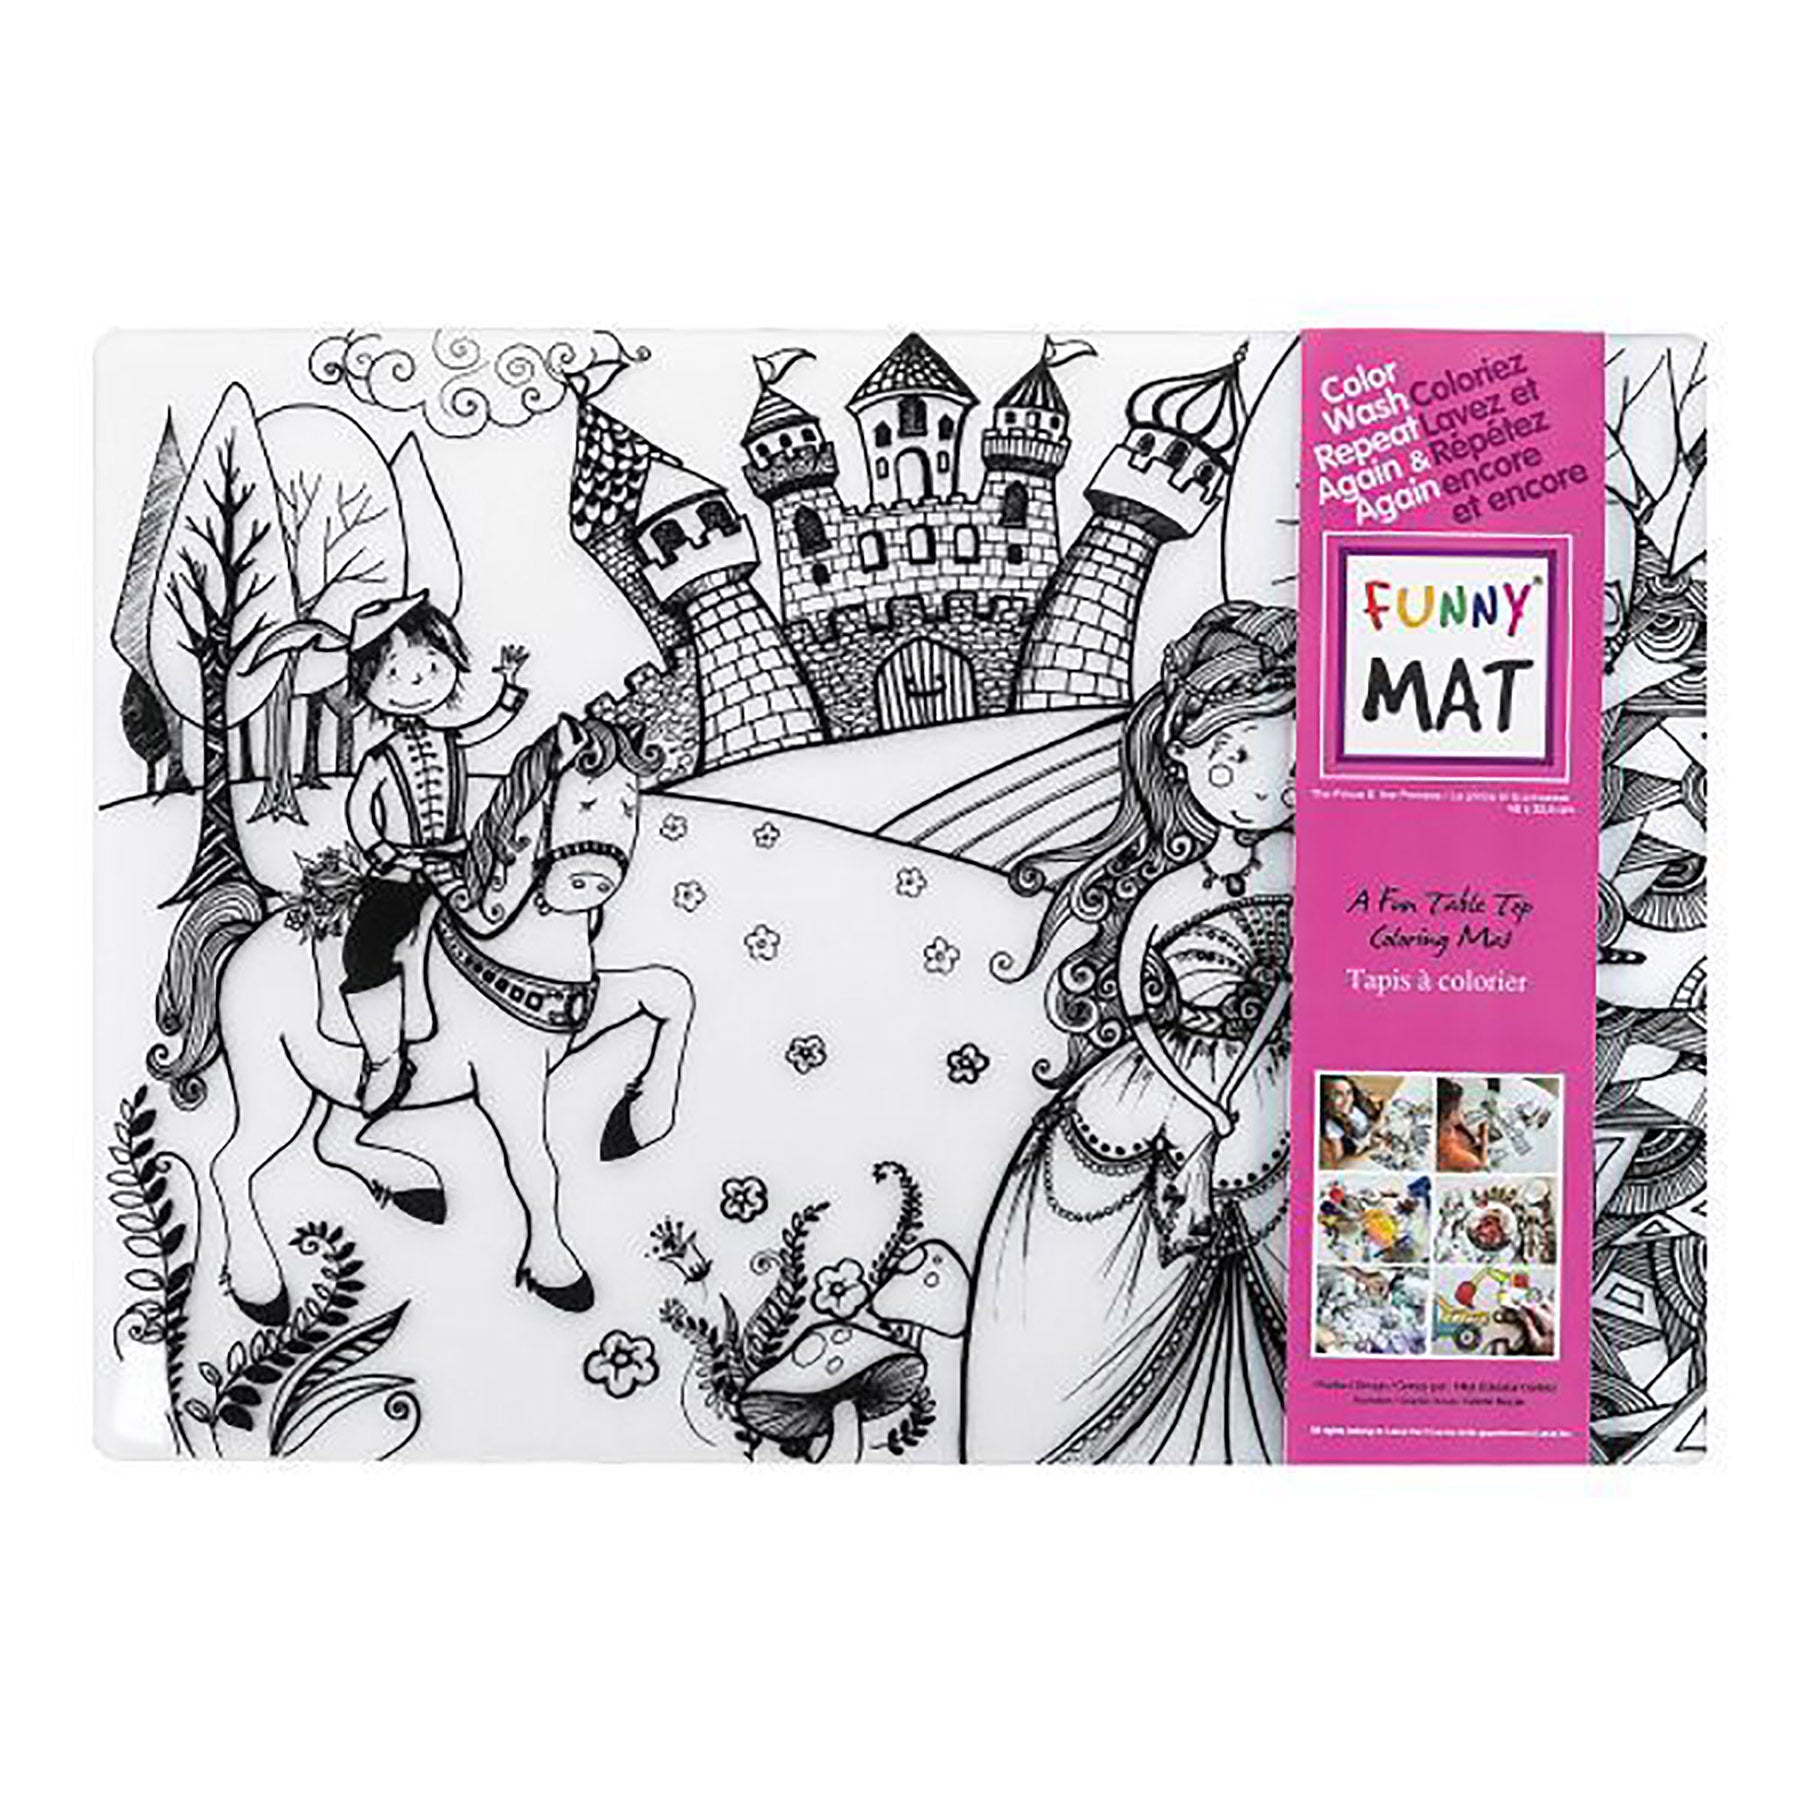 Funny Mat Coloring Placemat - Princess 18.9x13.2in